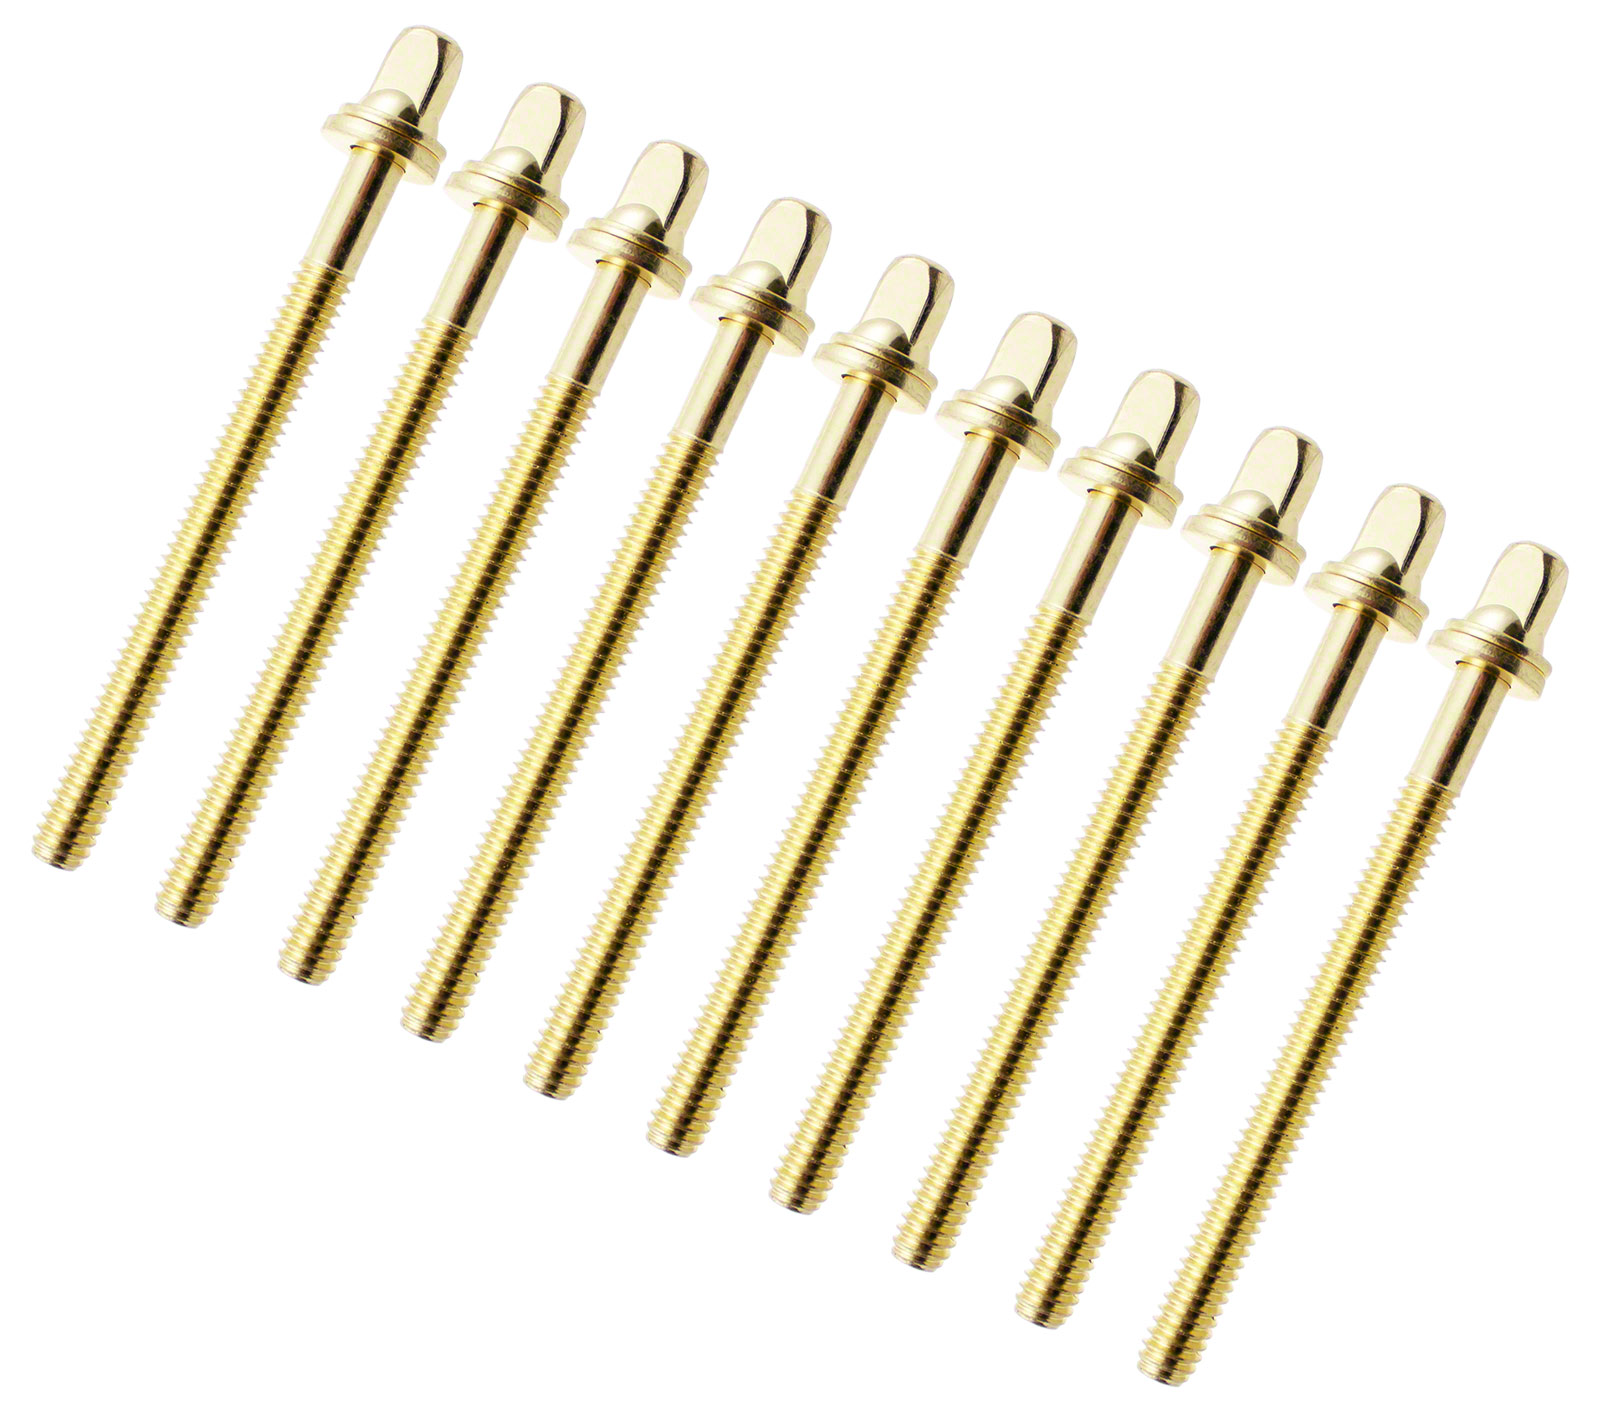 SPAREDRUM TRC-65W-BR - 65MM TENSION ROD BRASS WITH WASHER - 7/32